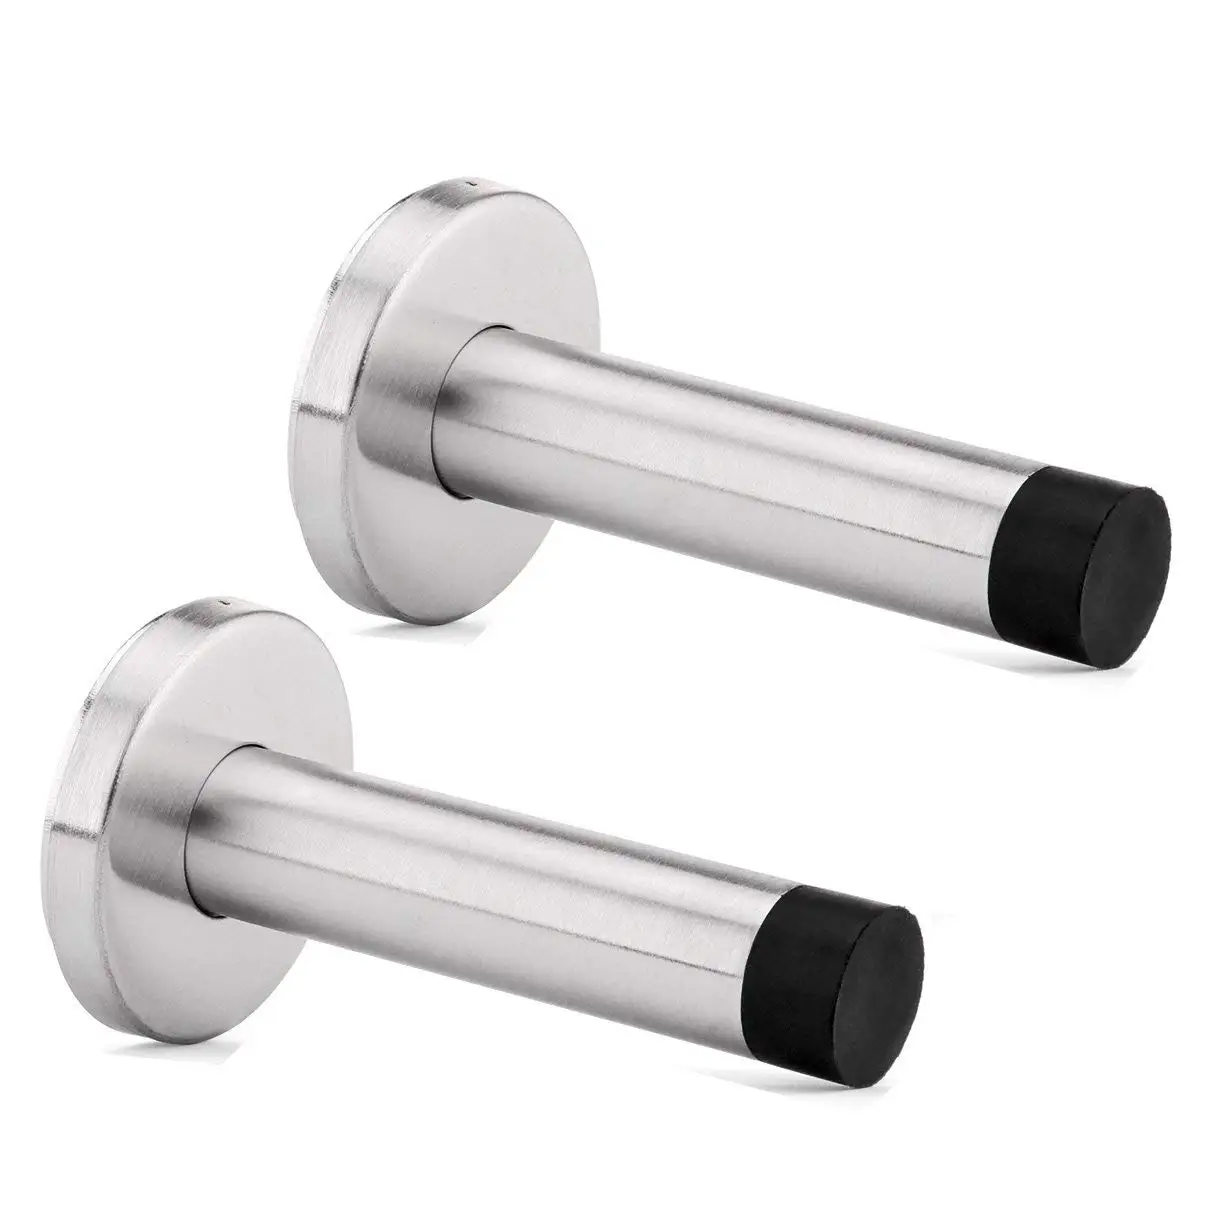 2Pcs Cylinder Stainless Steel Door Stop Door Stoppers Stopper 75mm Buffer Wall Mounted